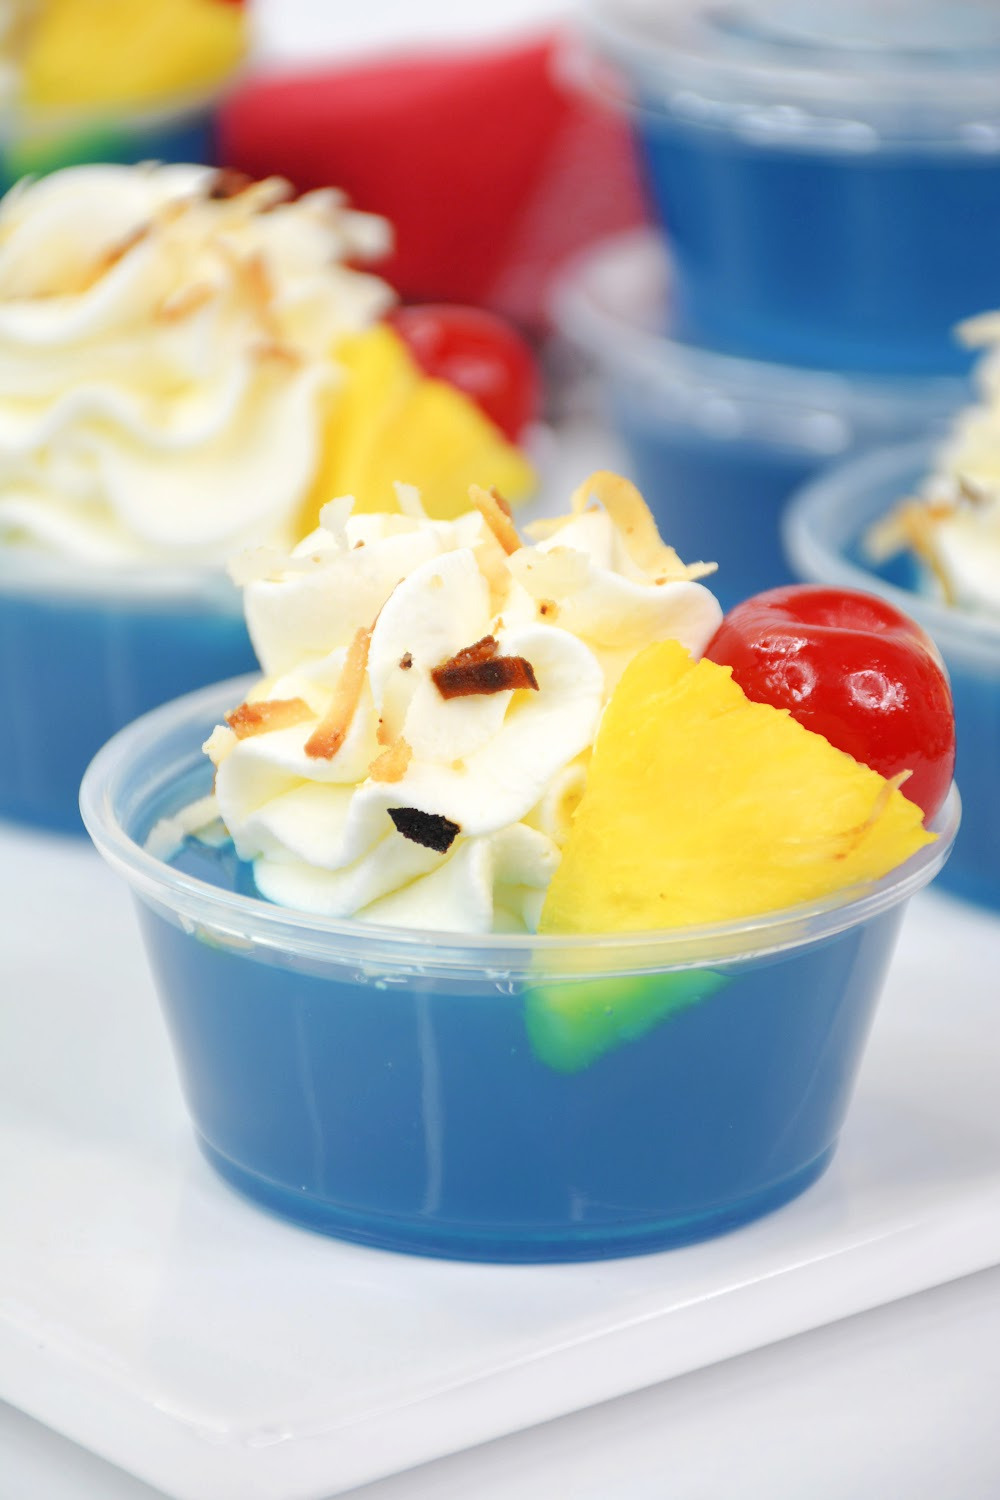 These blue Hawaiian jello shots are made with tasty berry blue jello topped with whipped cream, toasted coconut garnished with pineapple and a maraschino cherry. These jello shots are sitting on a red checked napkin on a white background.